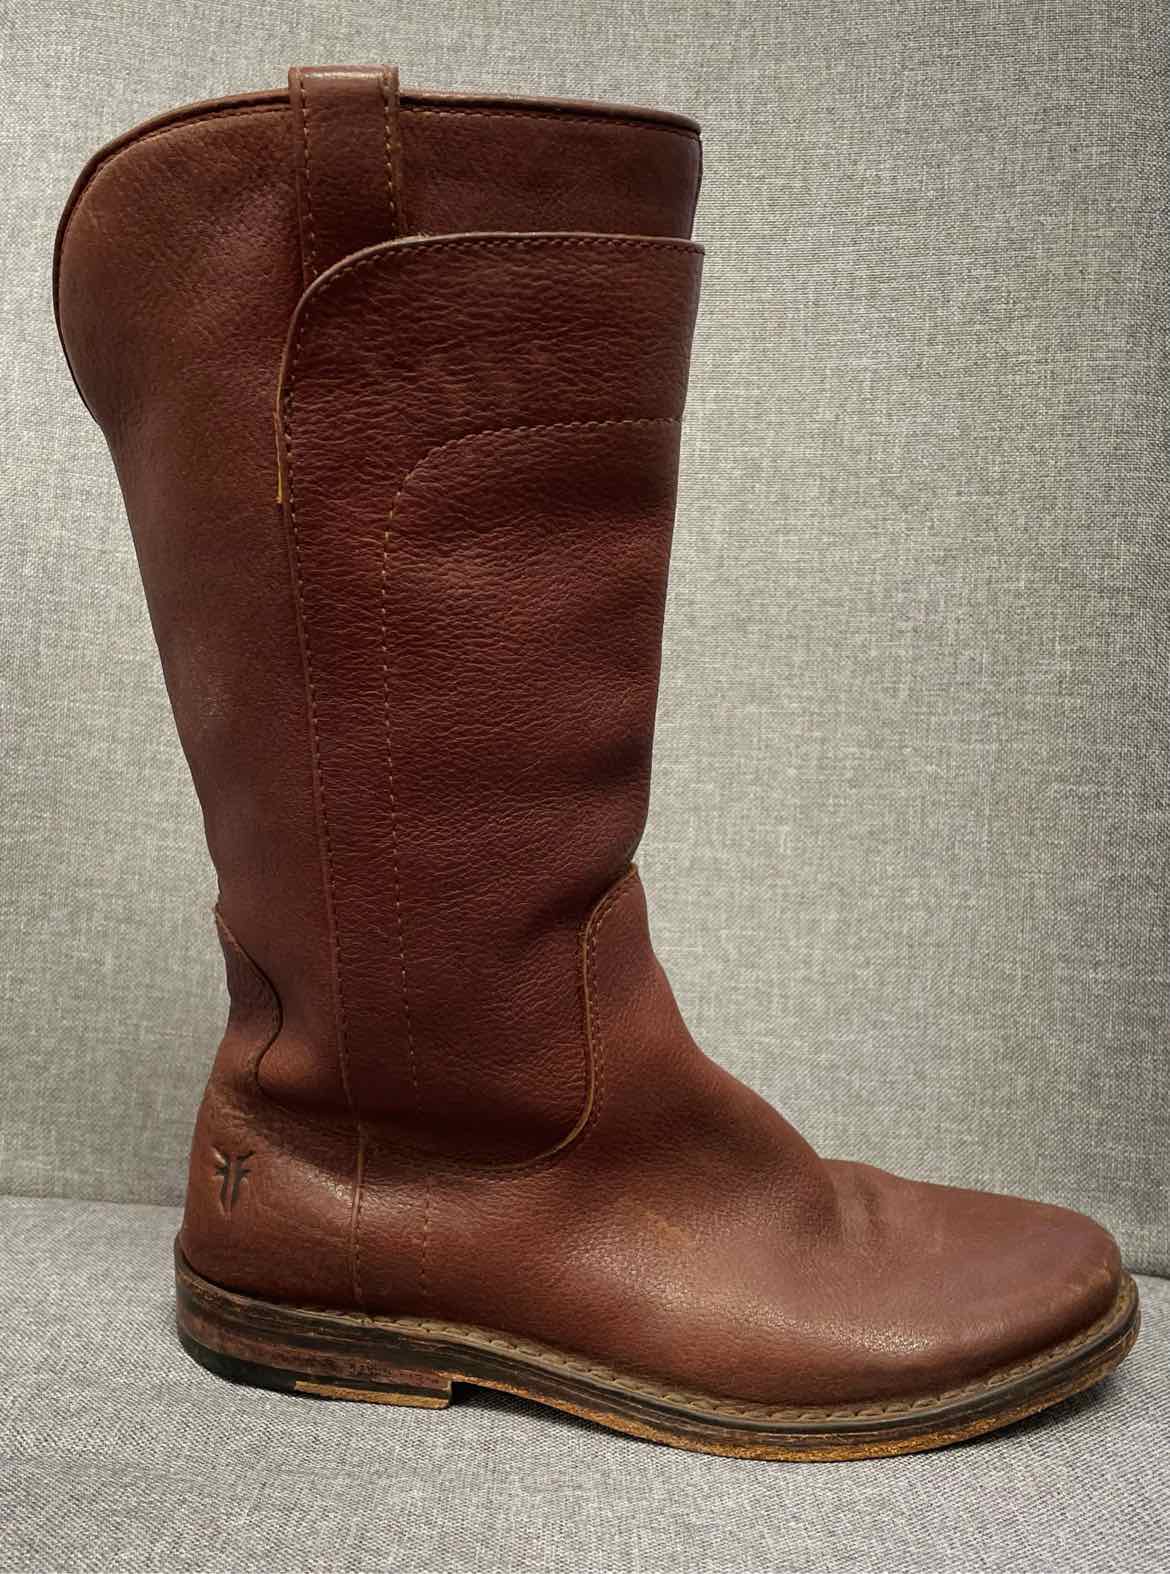 2 FRYE Shoes/Boots